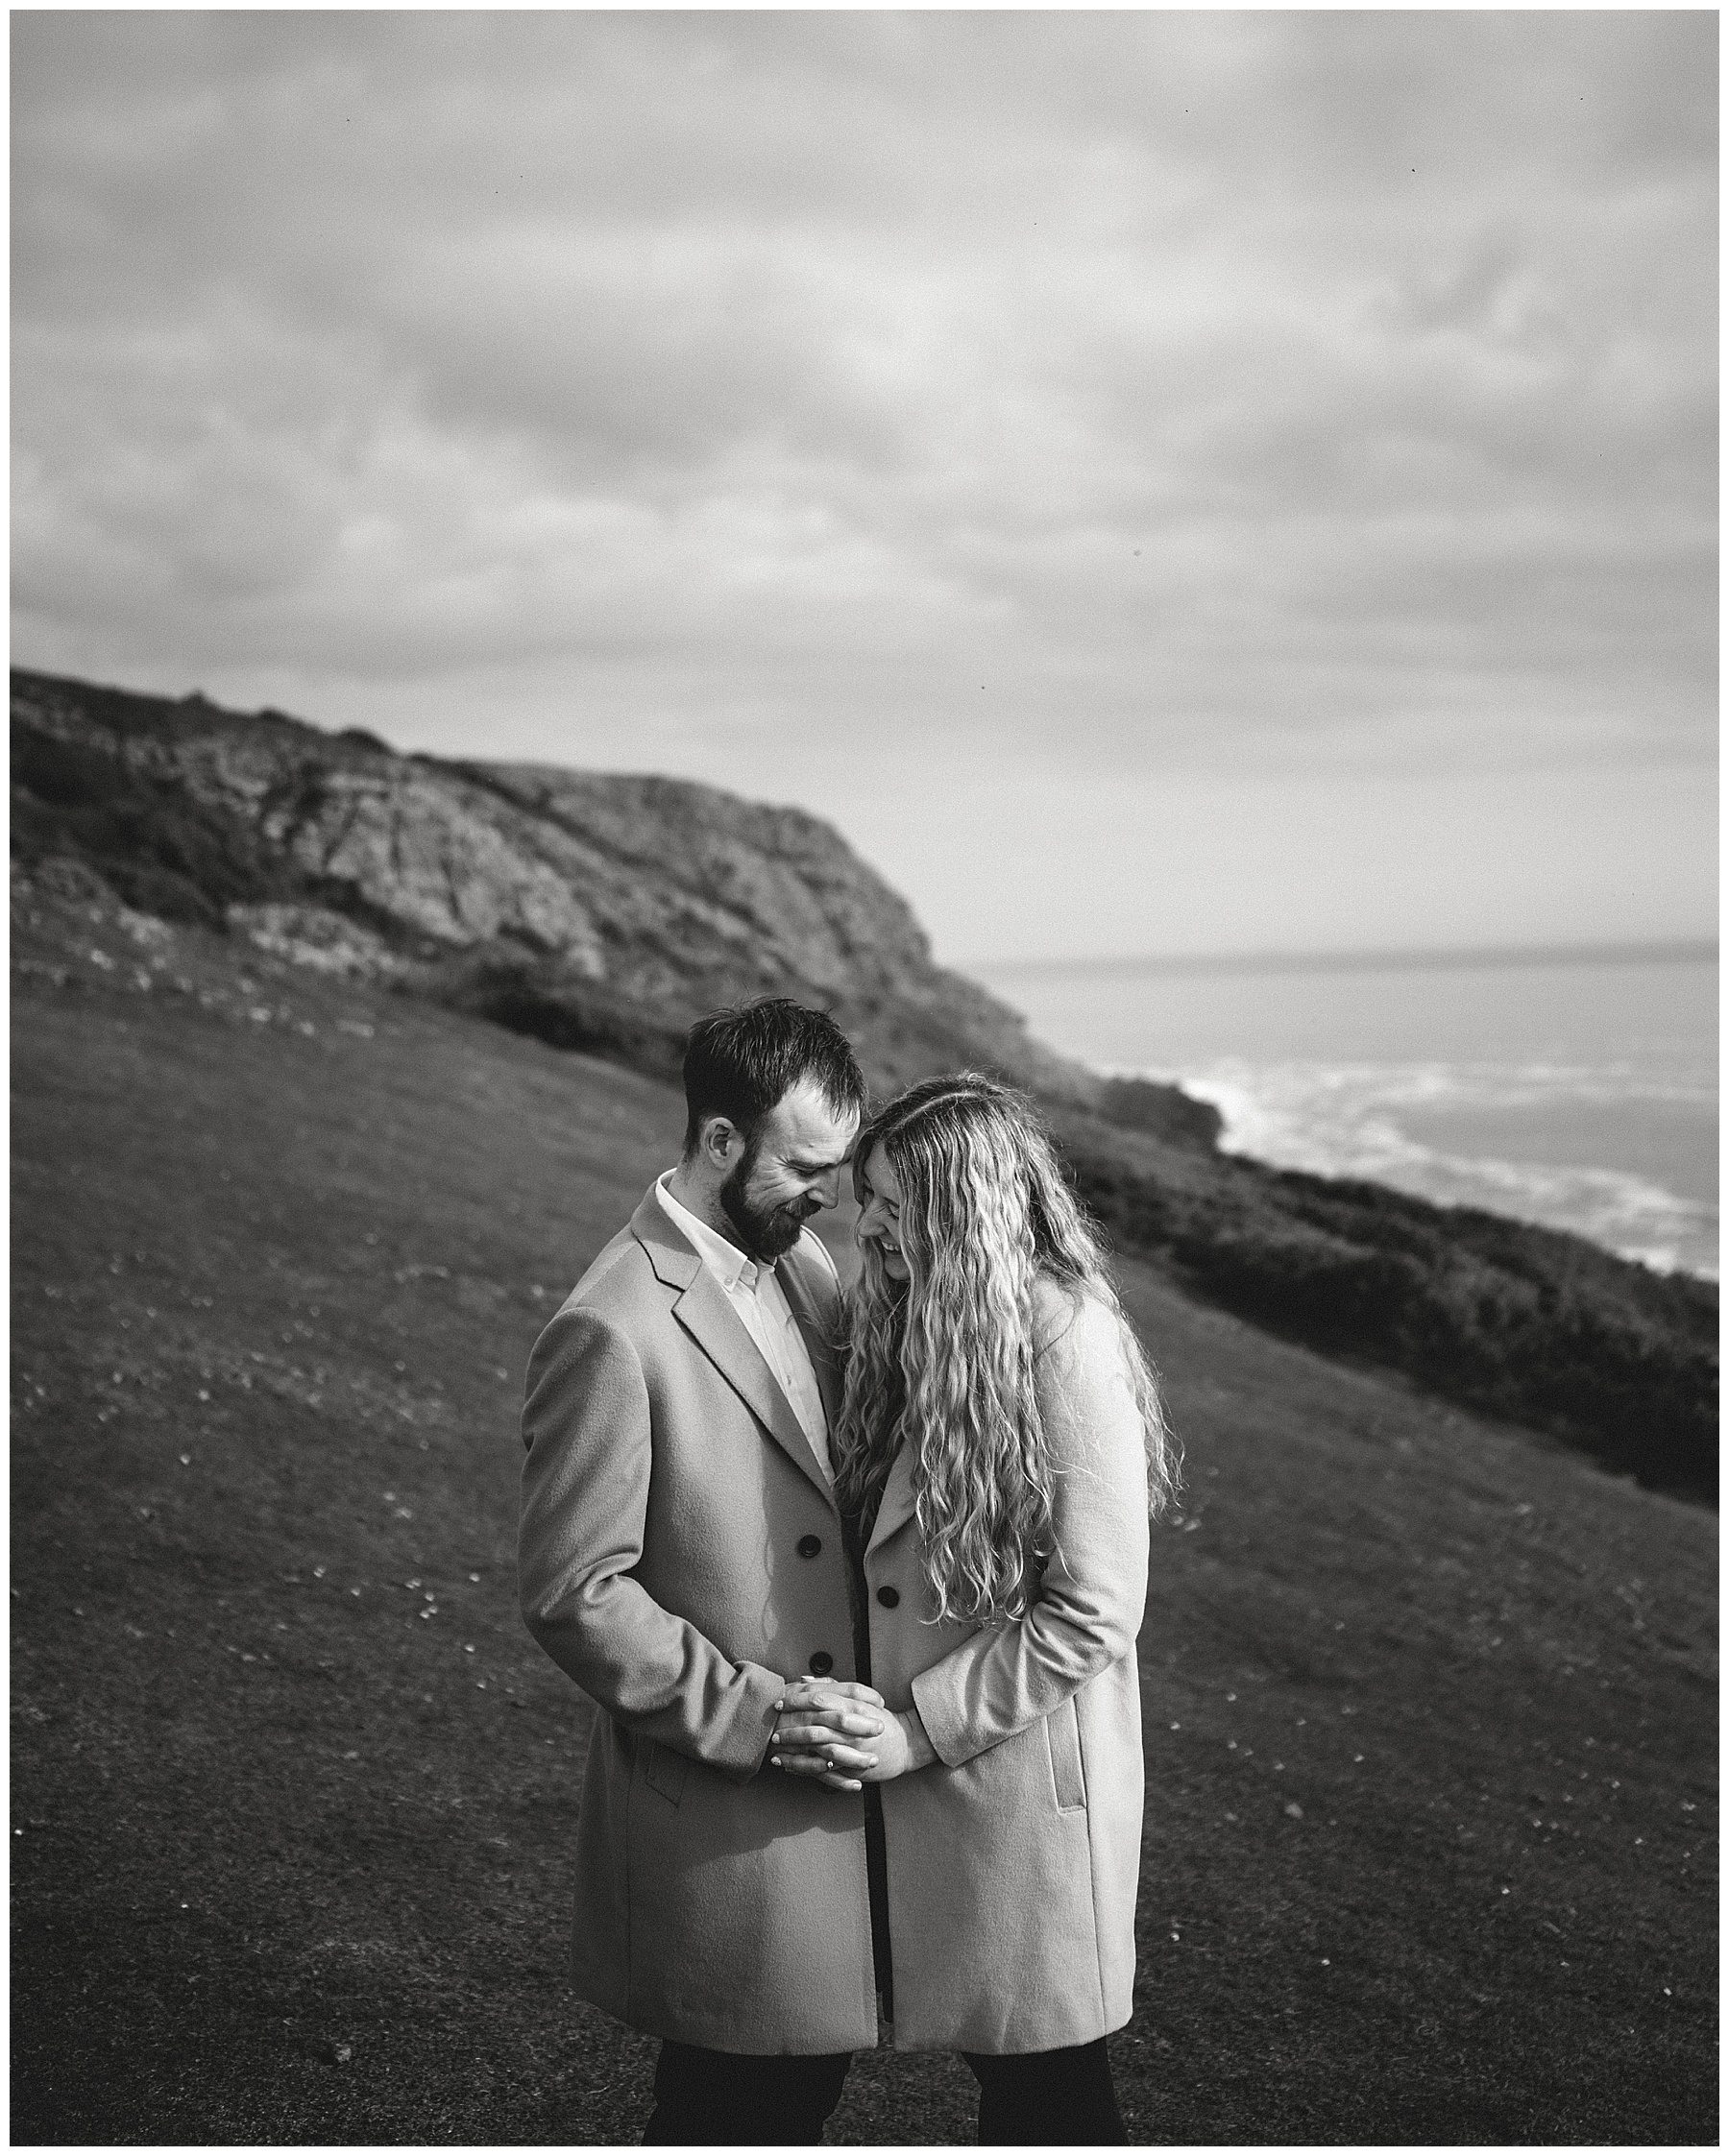 Engagement Photos at Rhossili Gower